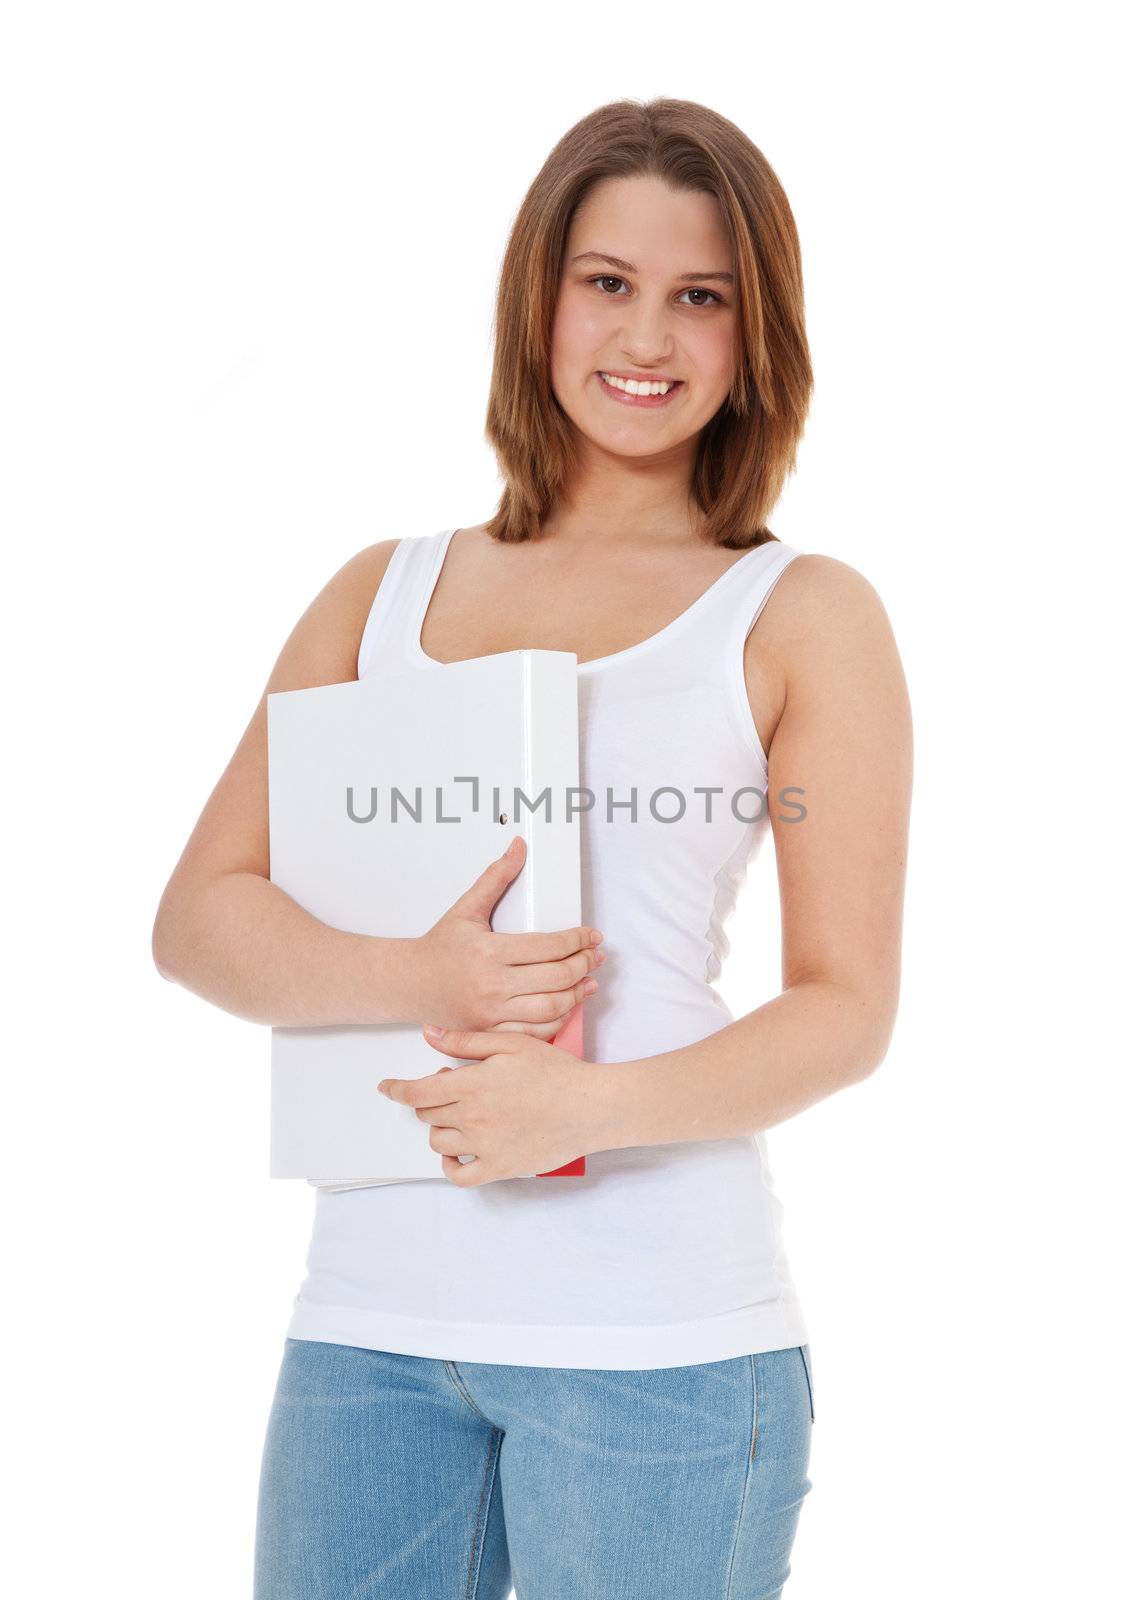 Attractive student. All on white background.